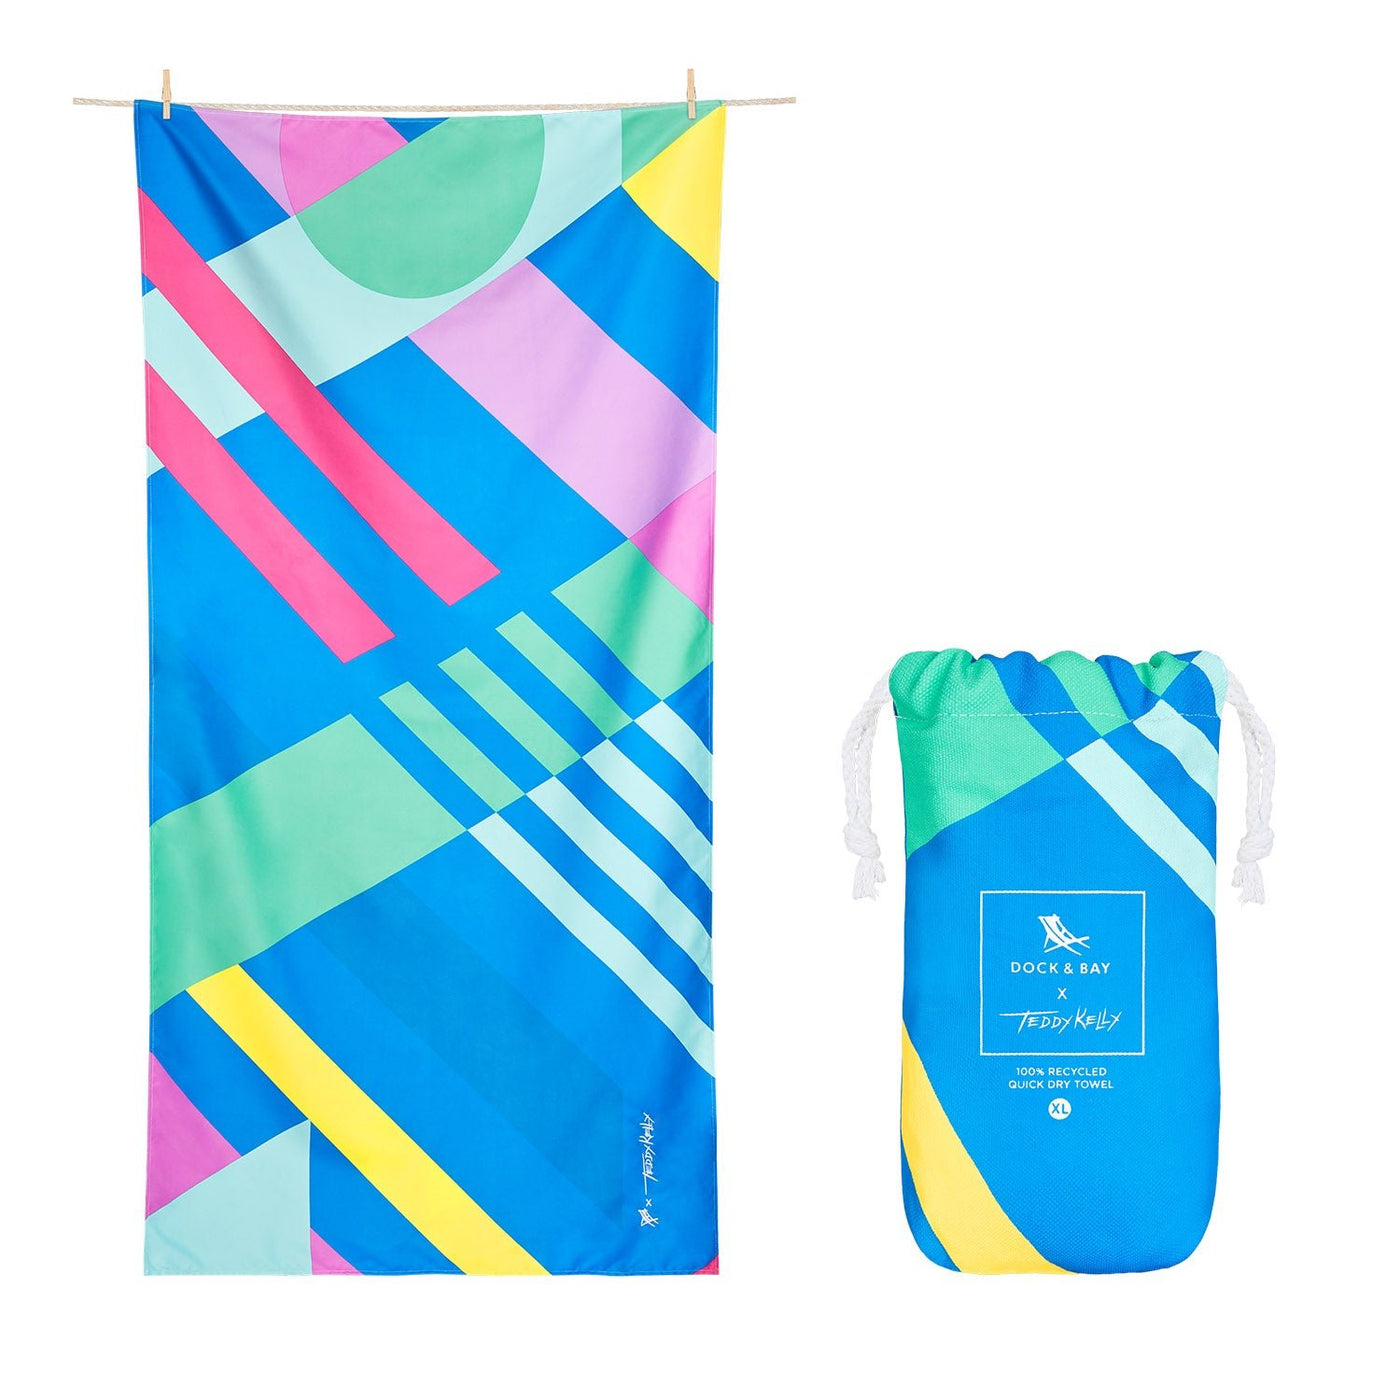 Dock & Bay - XL Teddy Kelly Towel - Share Your Passion Blue